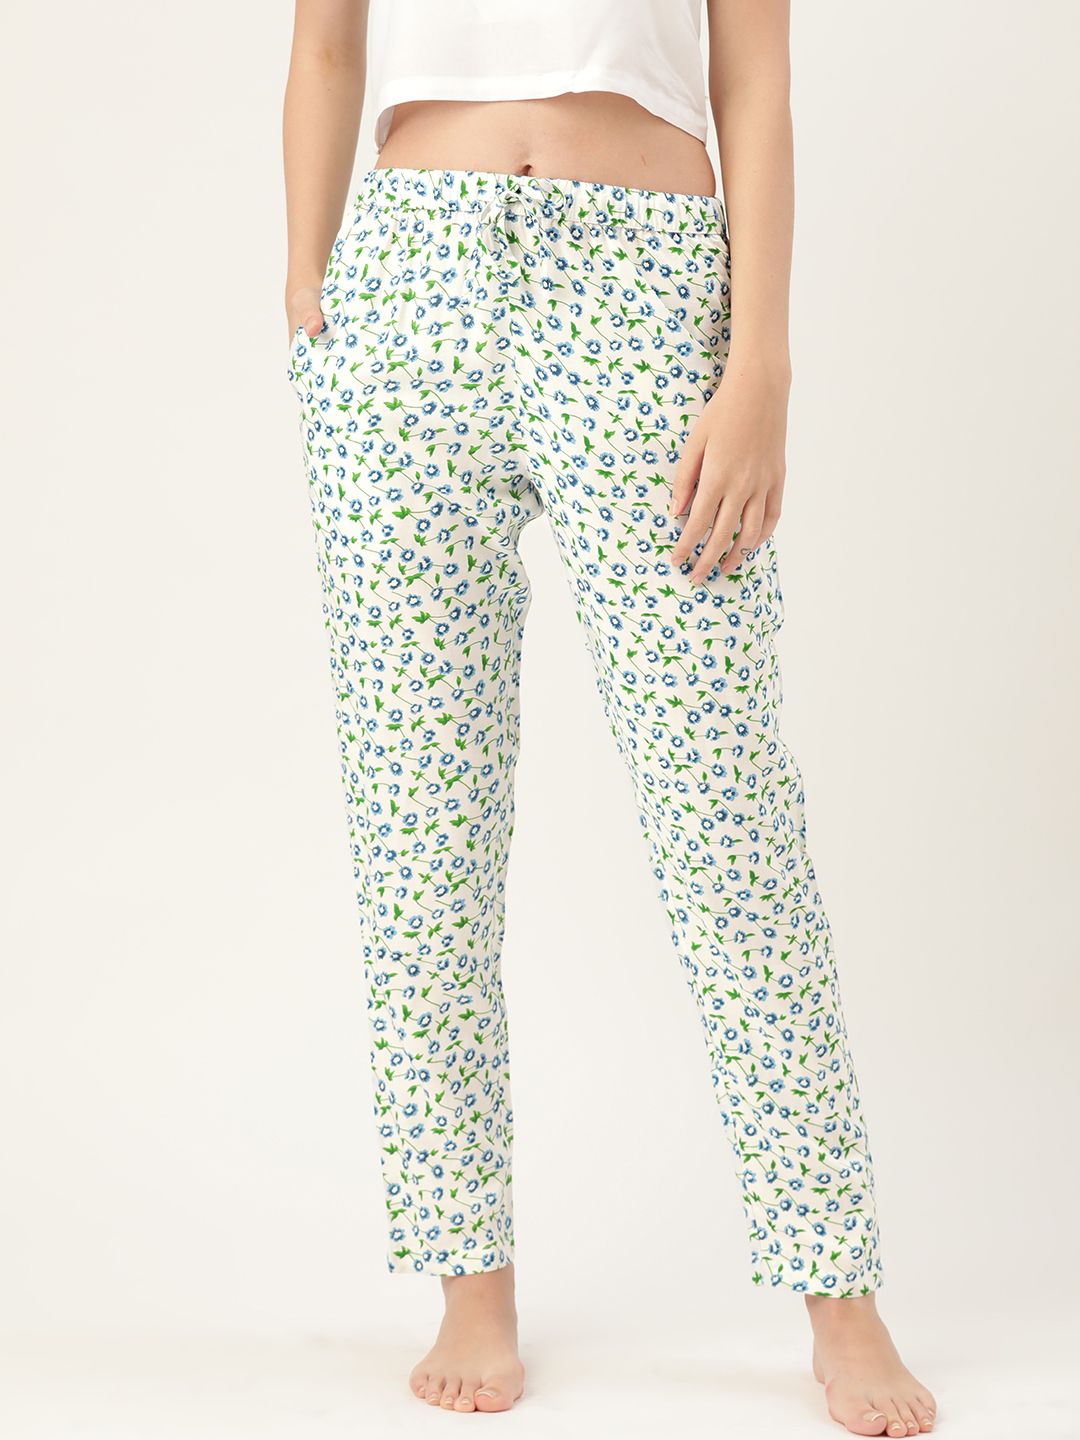 ETC Women White & Blue Floral Print Lounge Pants Price in India